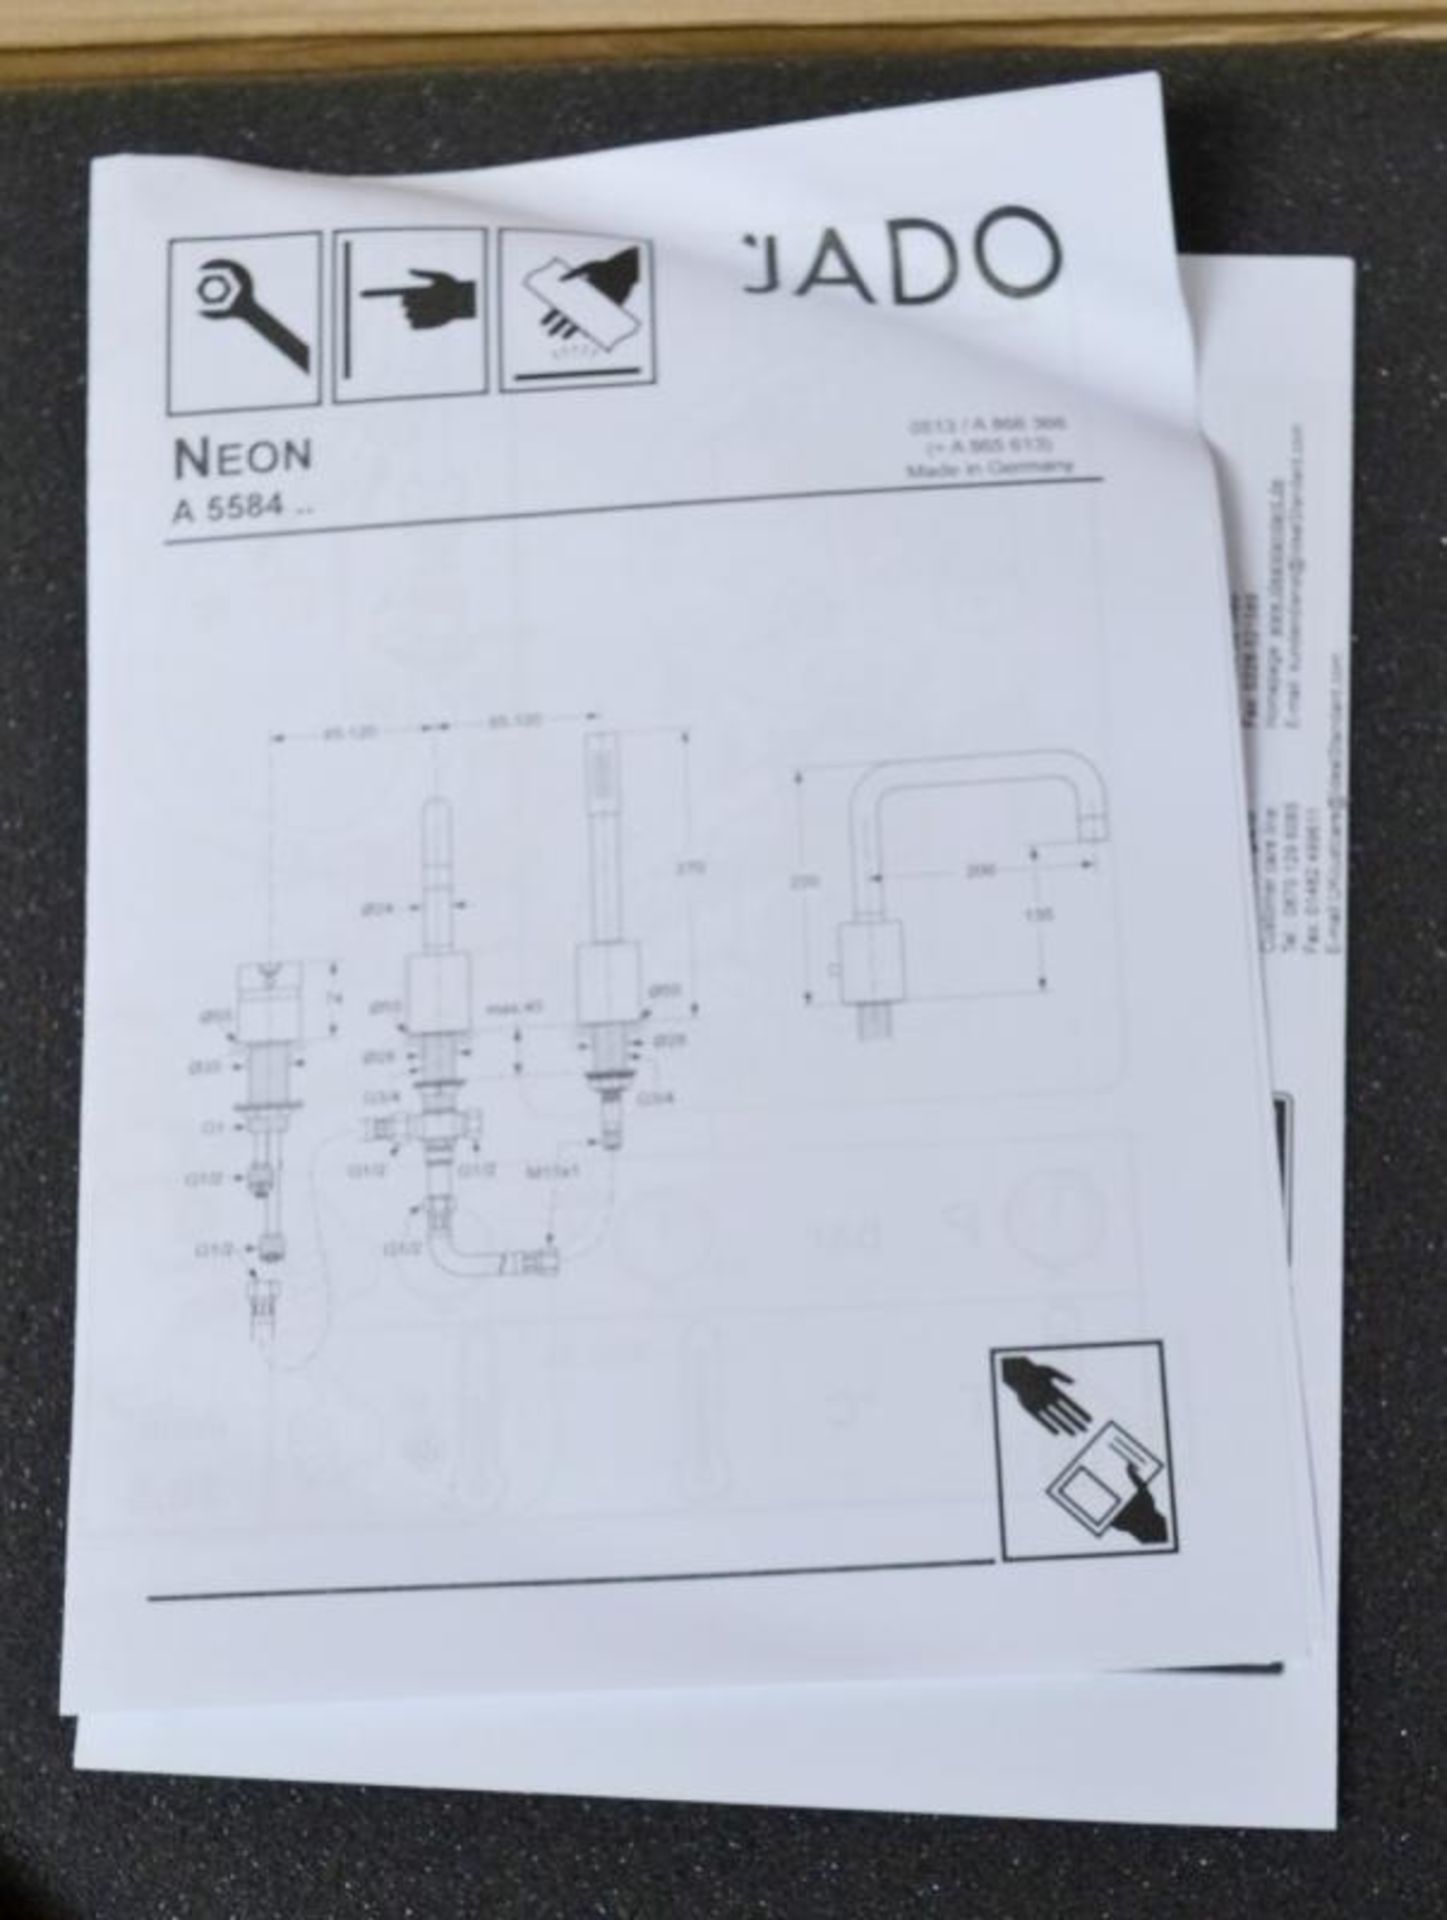 1 x Ideal Standard JADO "Neon" 3-Hole Bath Shower Mixer With Integrated Manual Diverter (A5584AA) - - Image 5 of 10